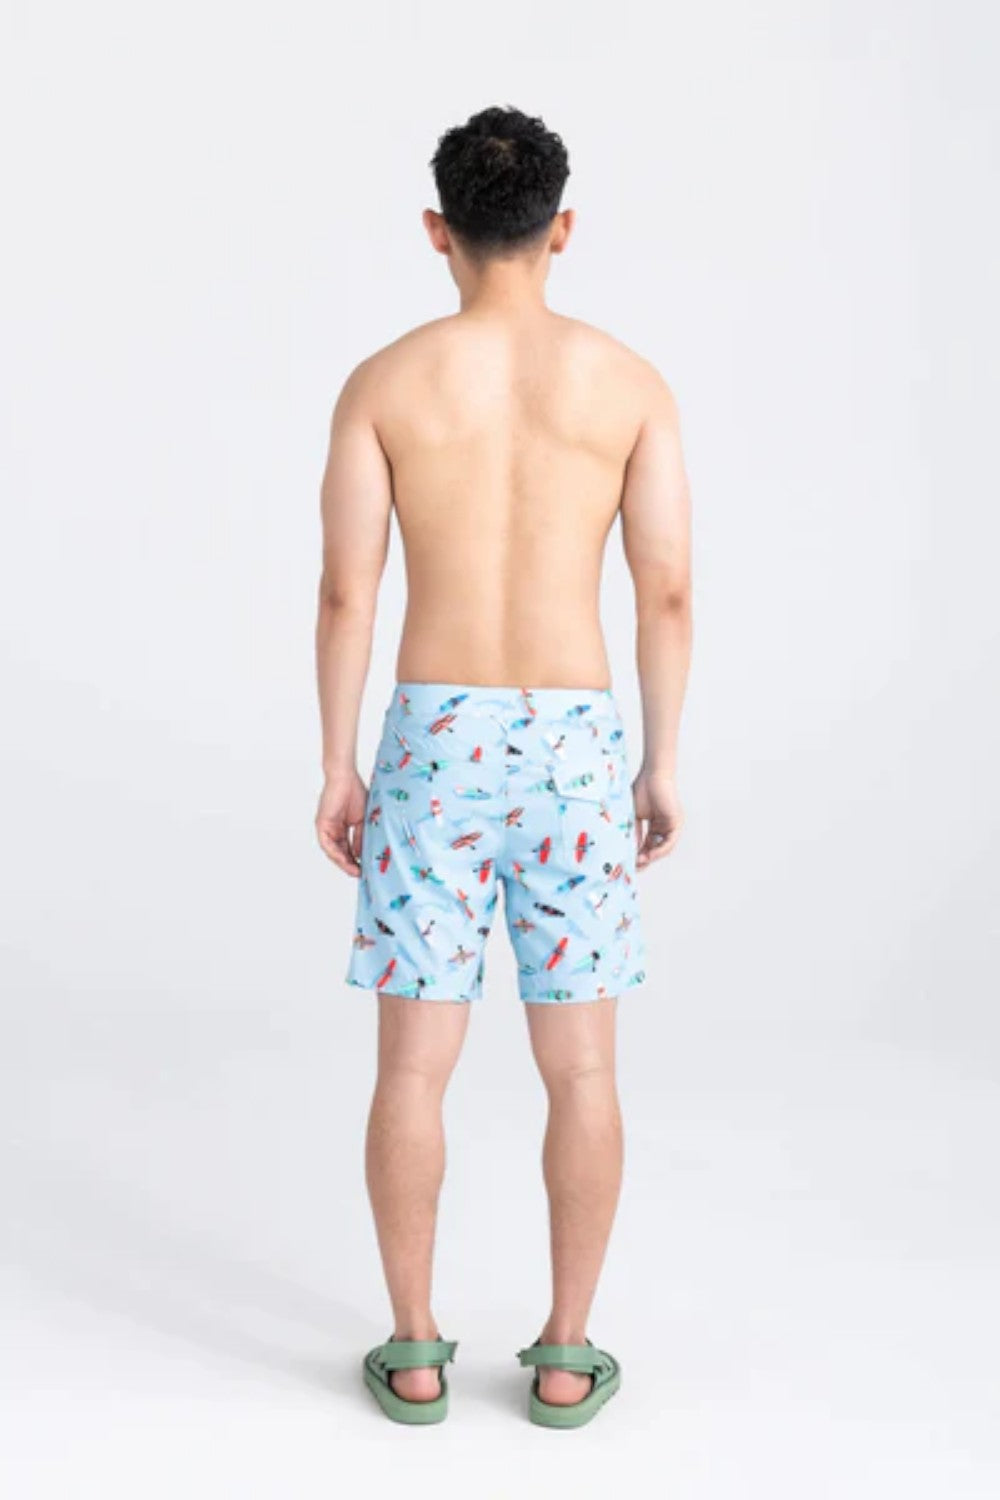 These 2N1 board shorts combine a Slim Fit liner under a fixed-waist shell. The integrated liner is form-fitting through the butt and thighs.Big waves and bold moves. Betawave is the first-ever board short equipped with the BallPark Pouch, providing unreal support in and out of the water.